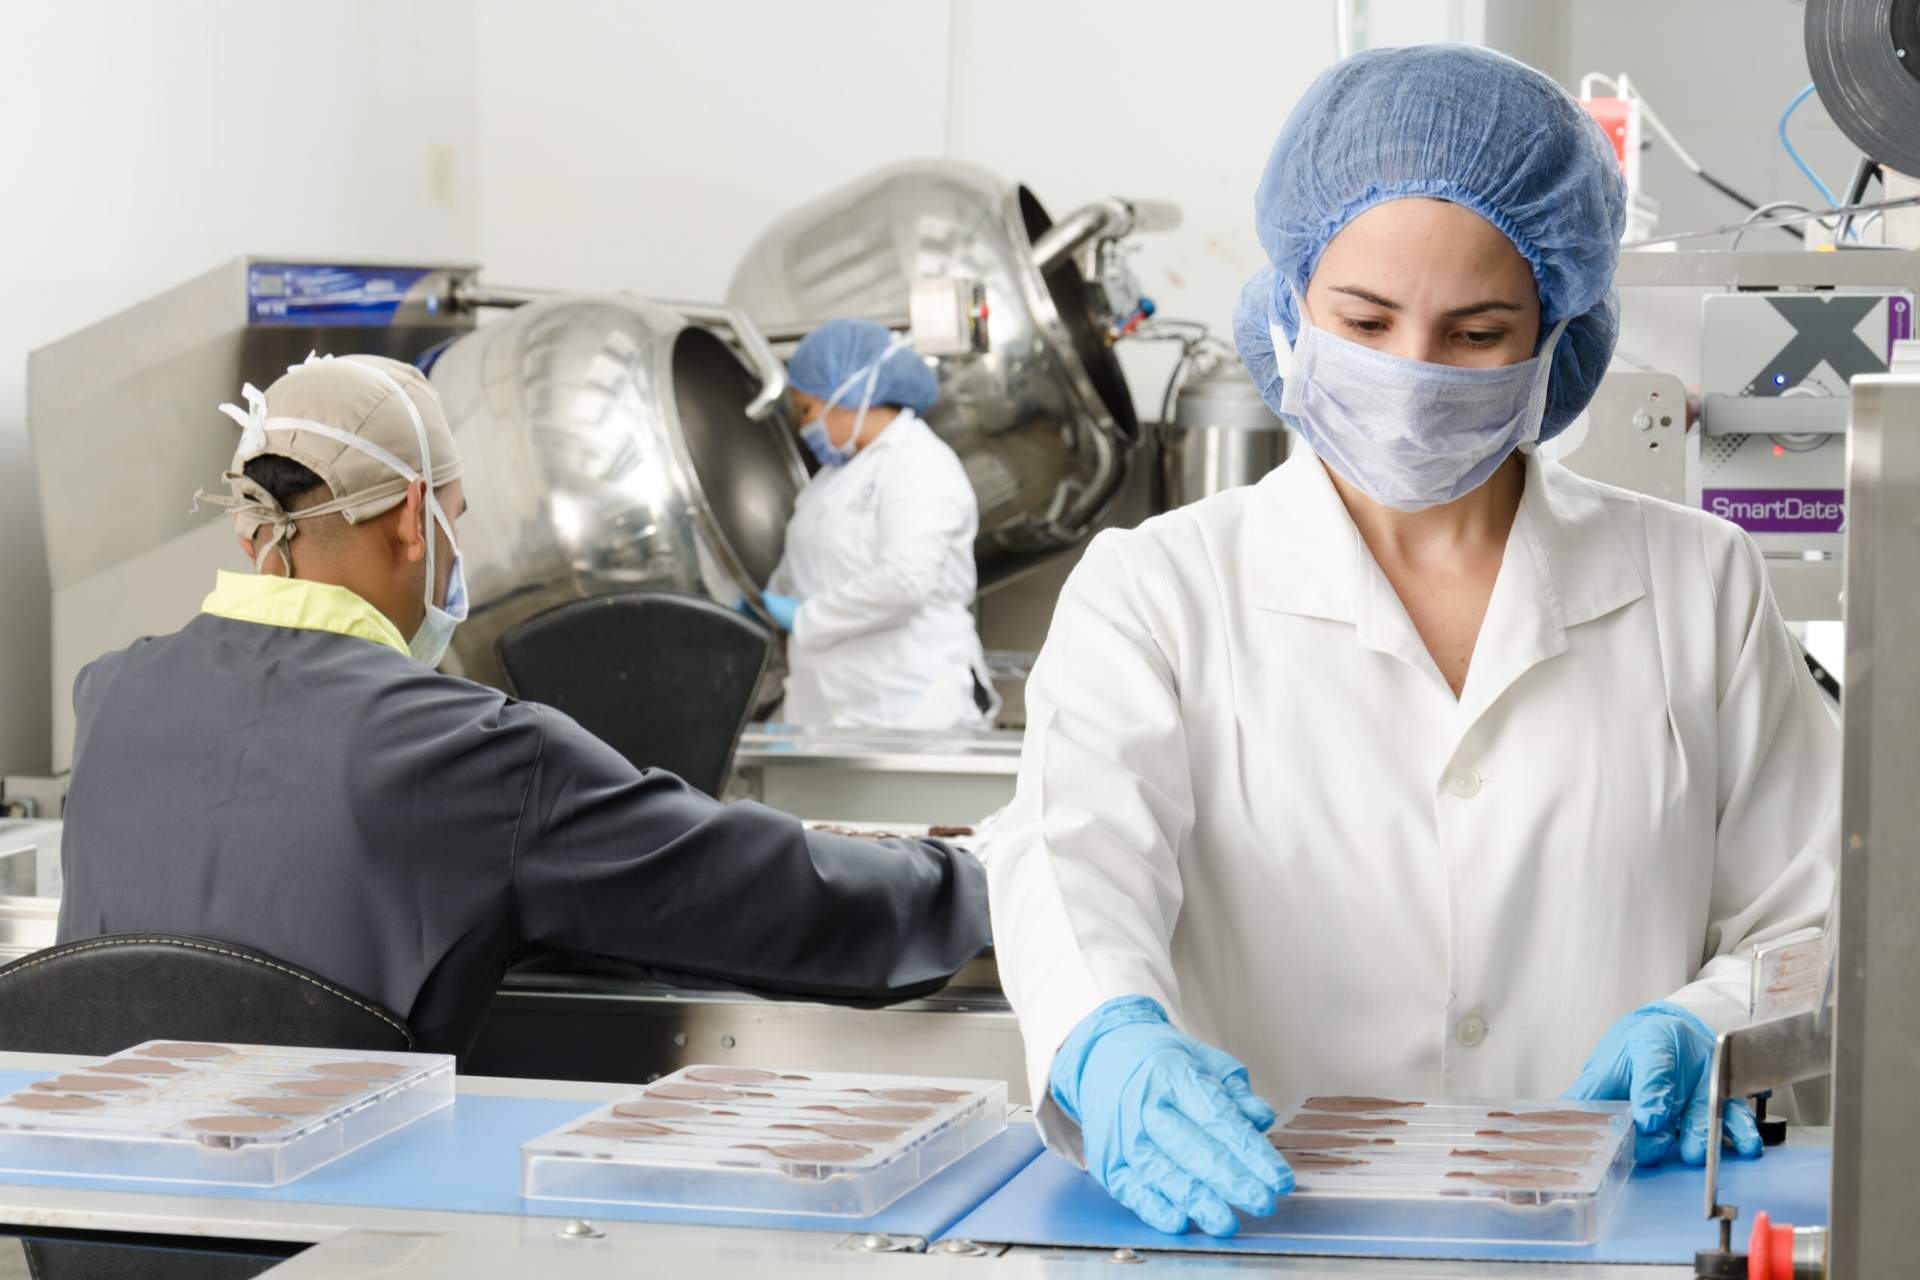 Why the heat of the wash matters when working in the Medical & Pharmaceutical industry